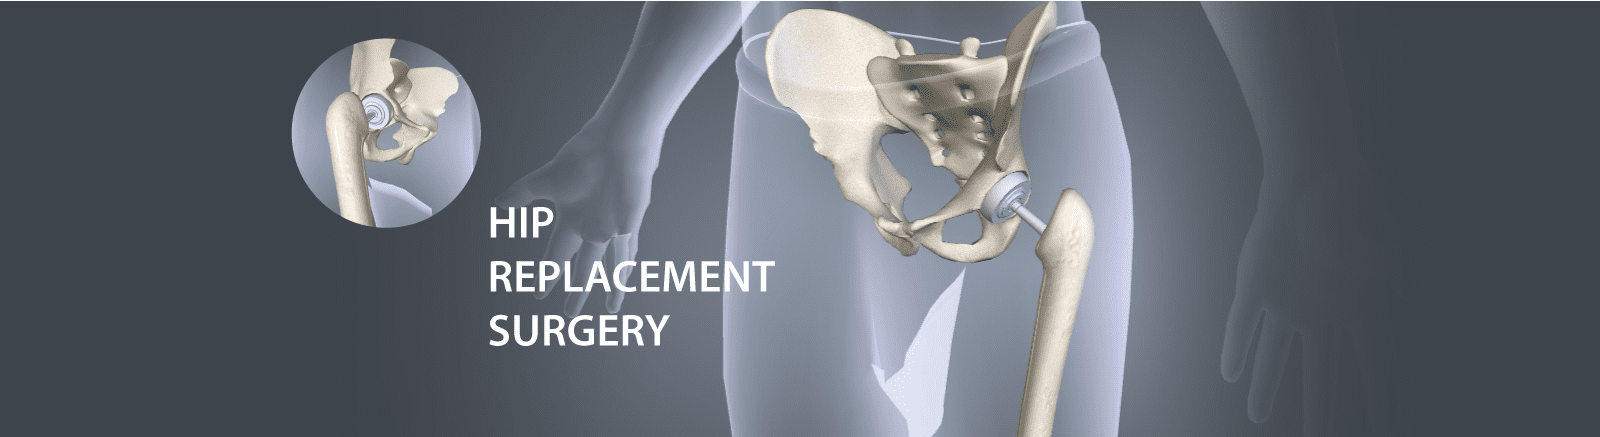 hip replacement surgery in India